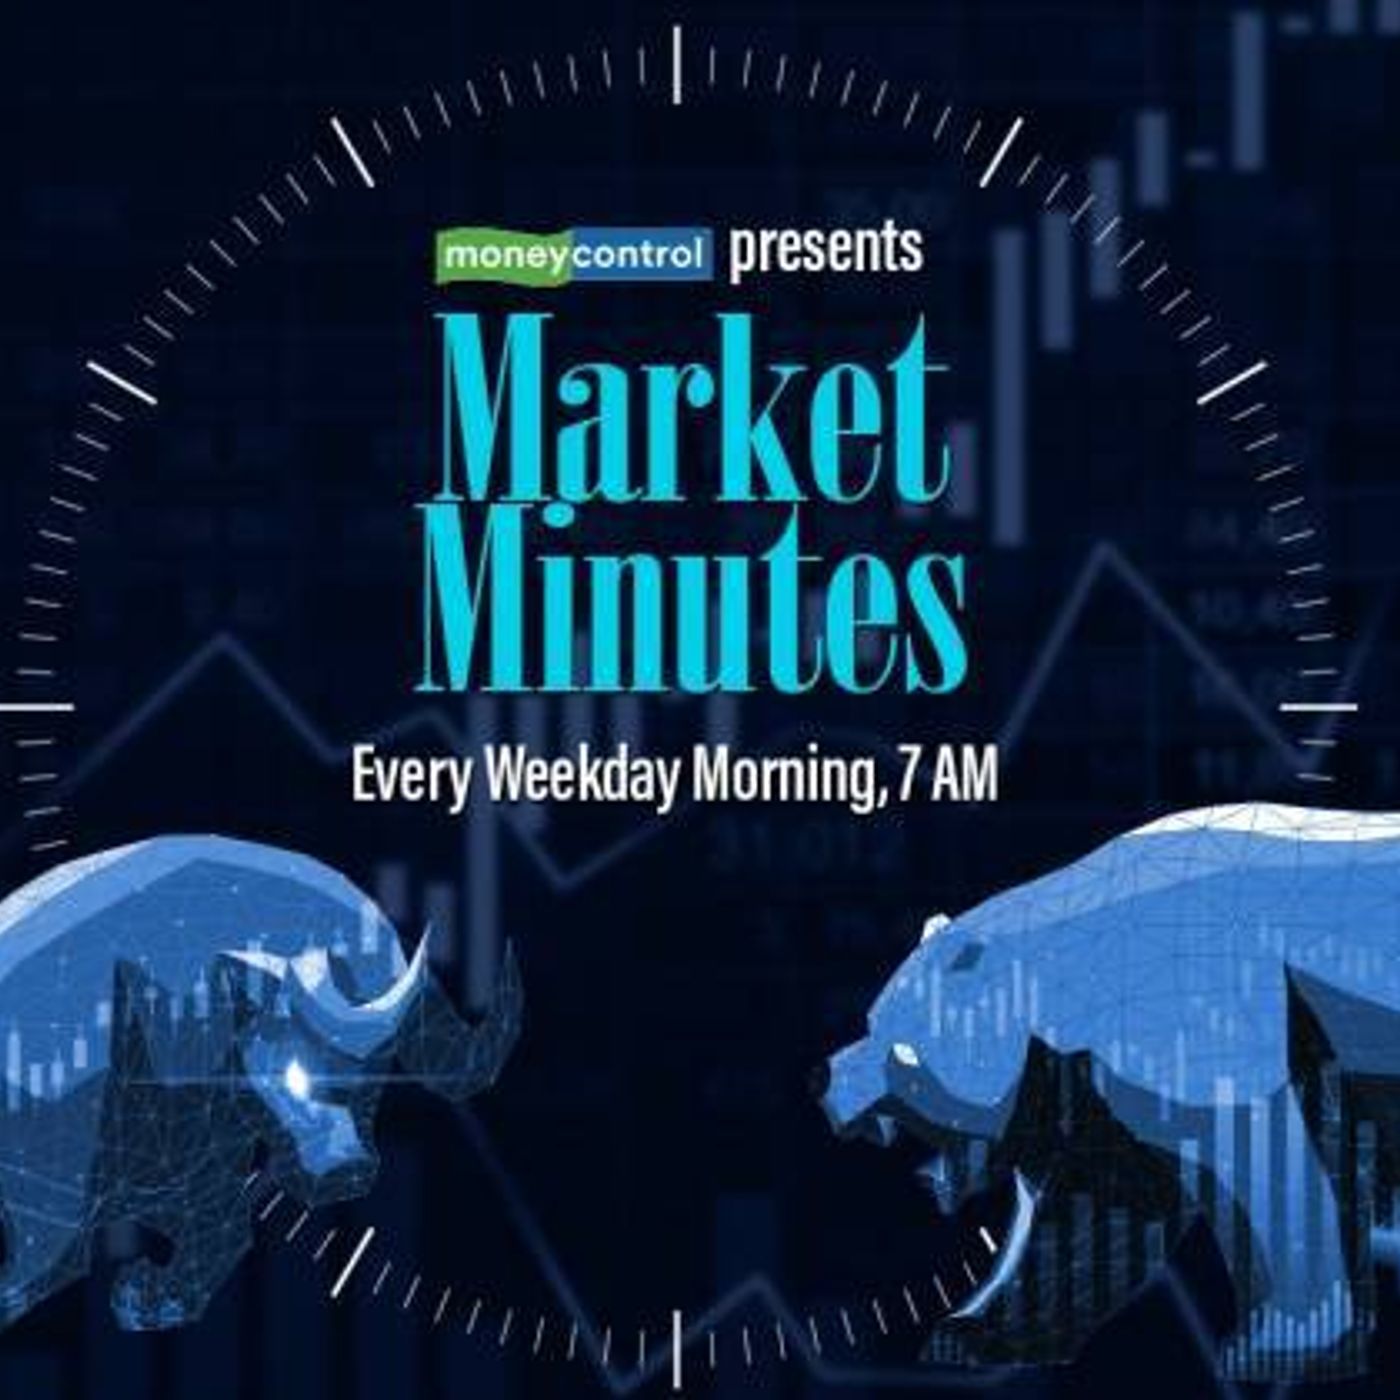 4205: Near-term volatility in market expected; all eyes on RBI monetary policy; Auto, telecom stocks in focus today | Market Minutes